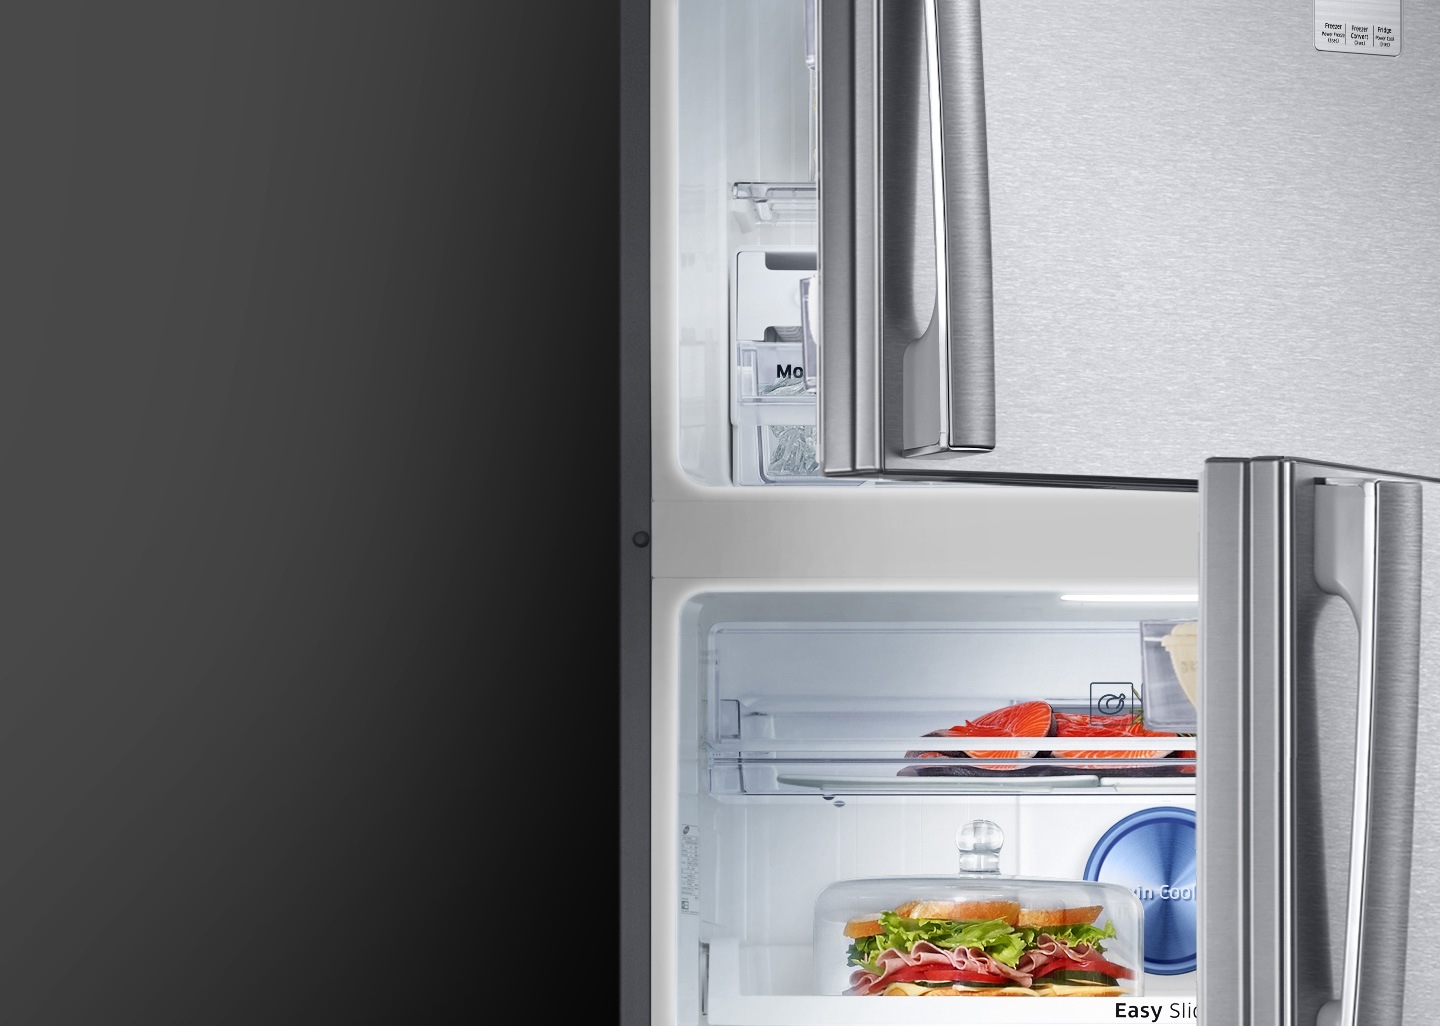 Samsung Twin Cooling Plus Top Freezer Fridge – an image of LED lighting, brighter with better power efficiency